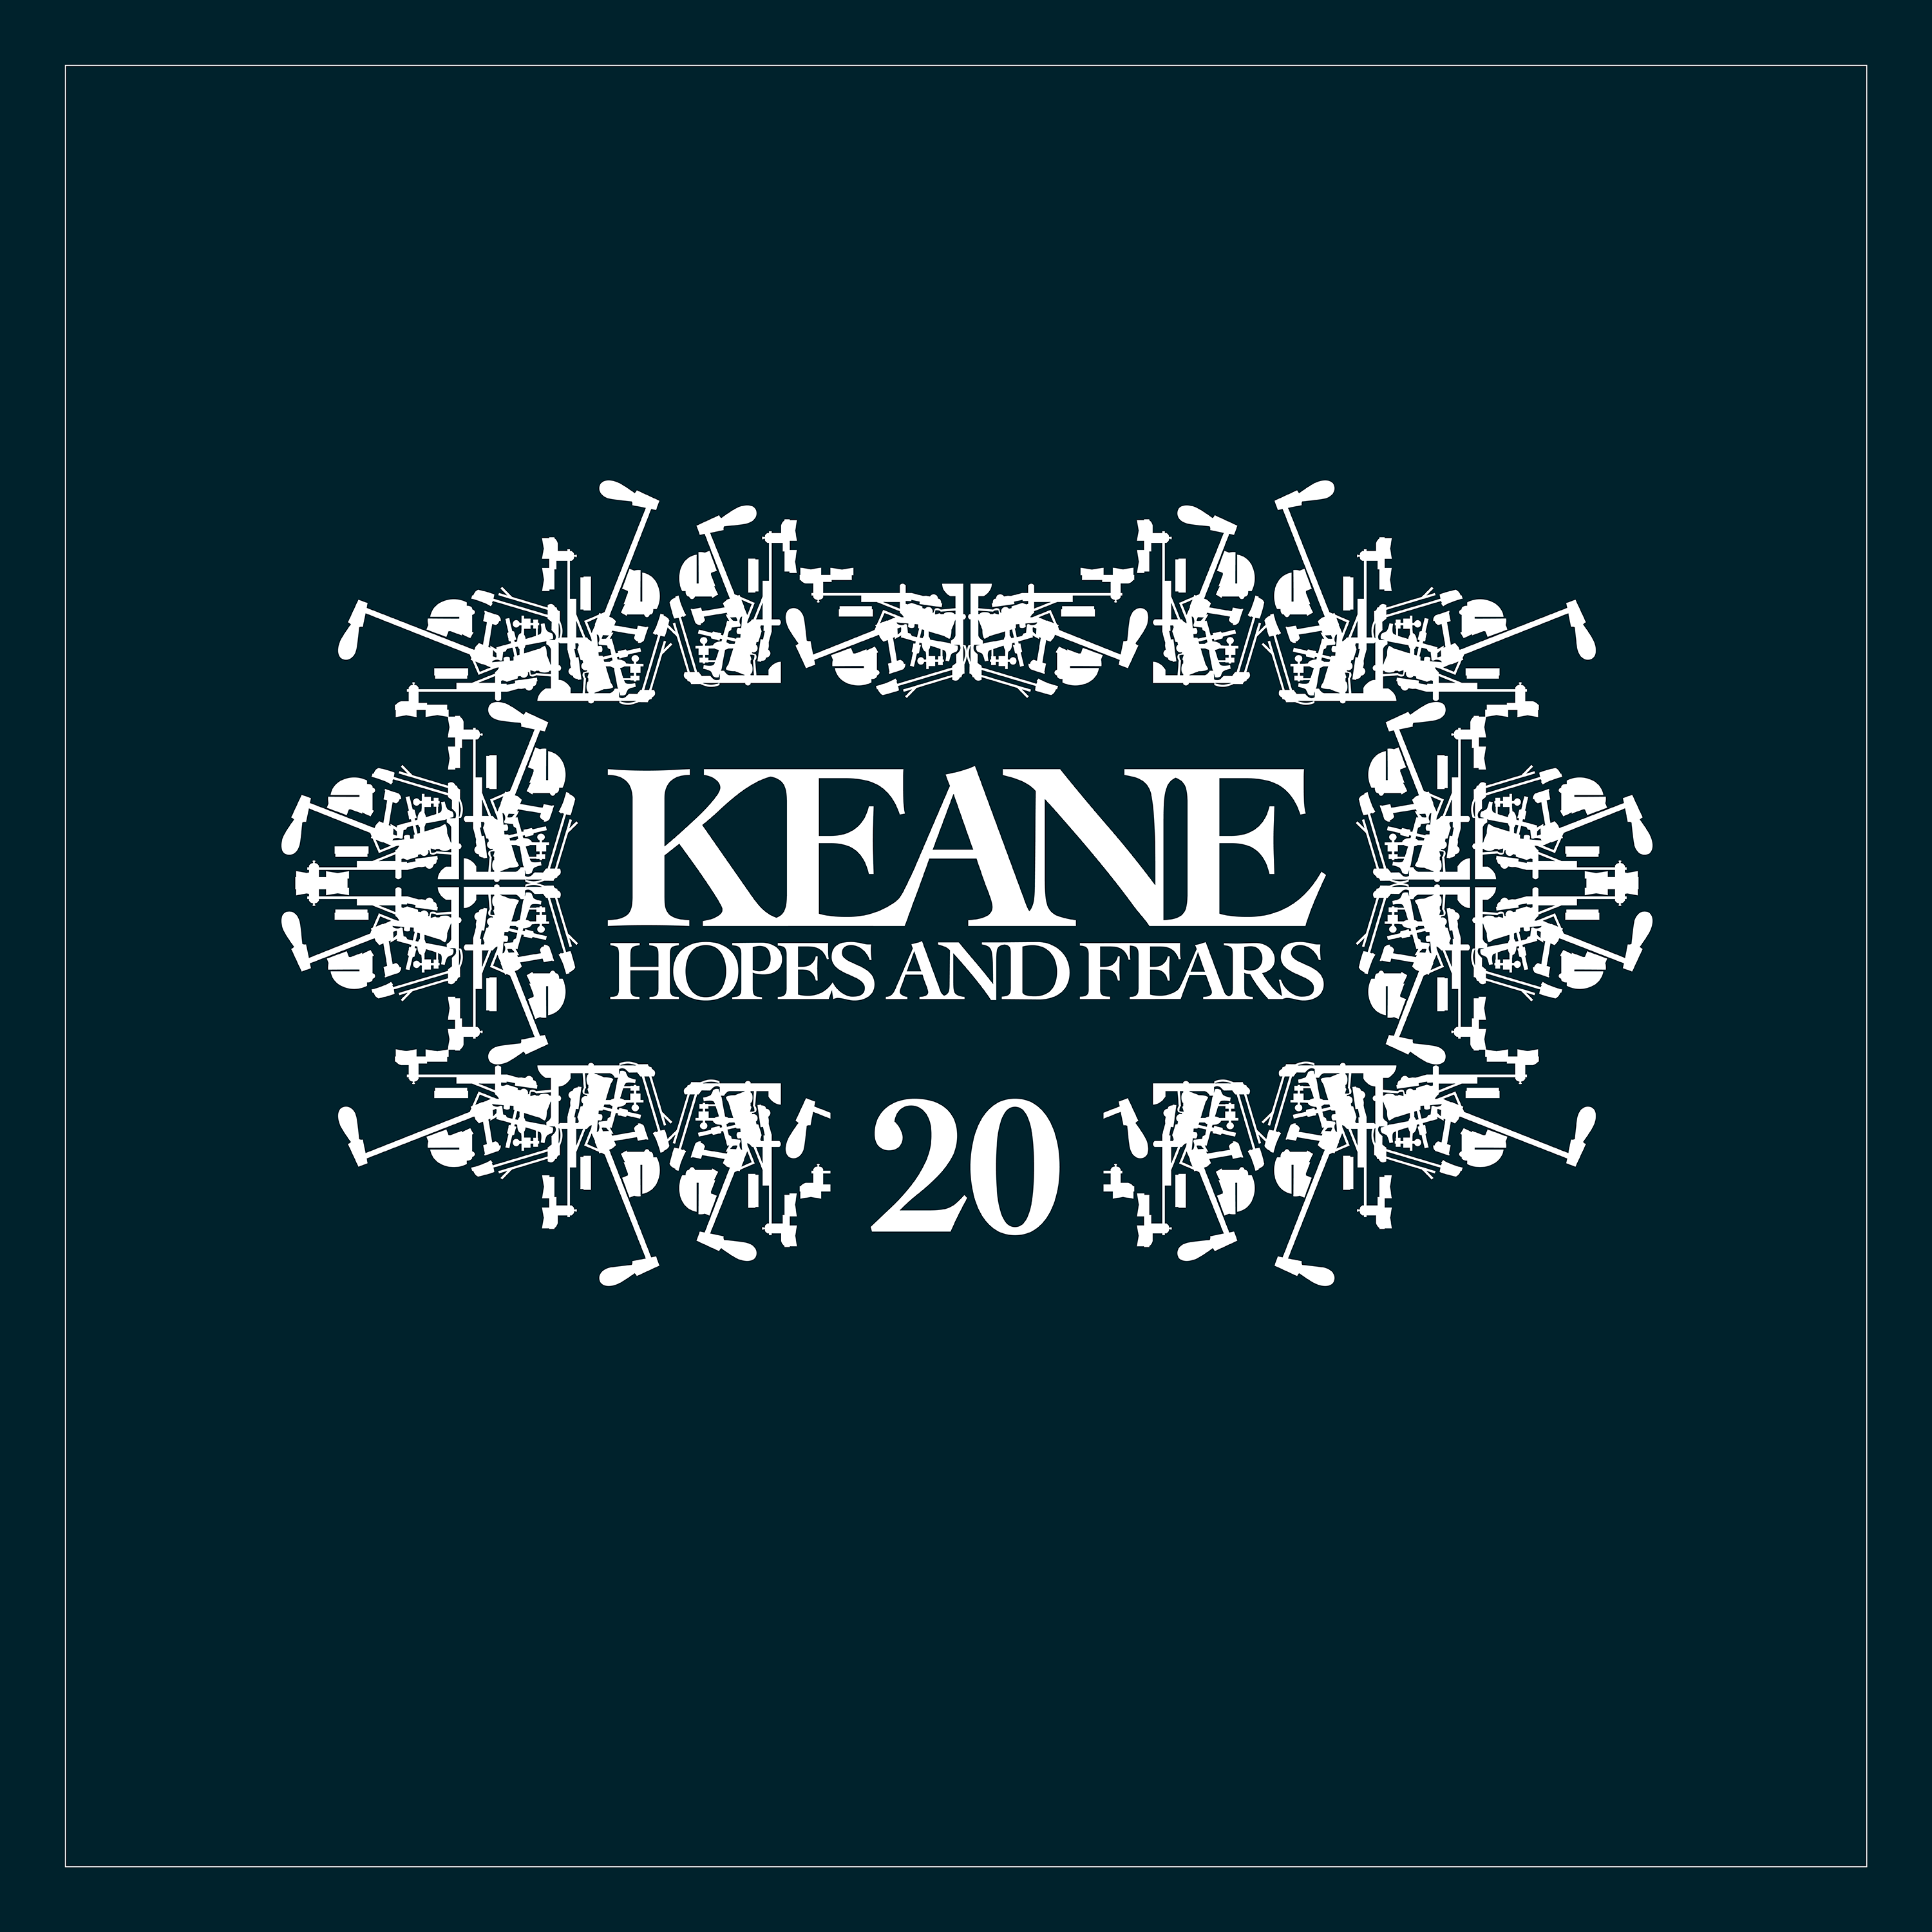 Keane - 20th Anniversary Hopes and Fears Limited 2LP Colour Vinyl